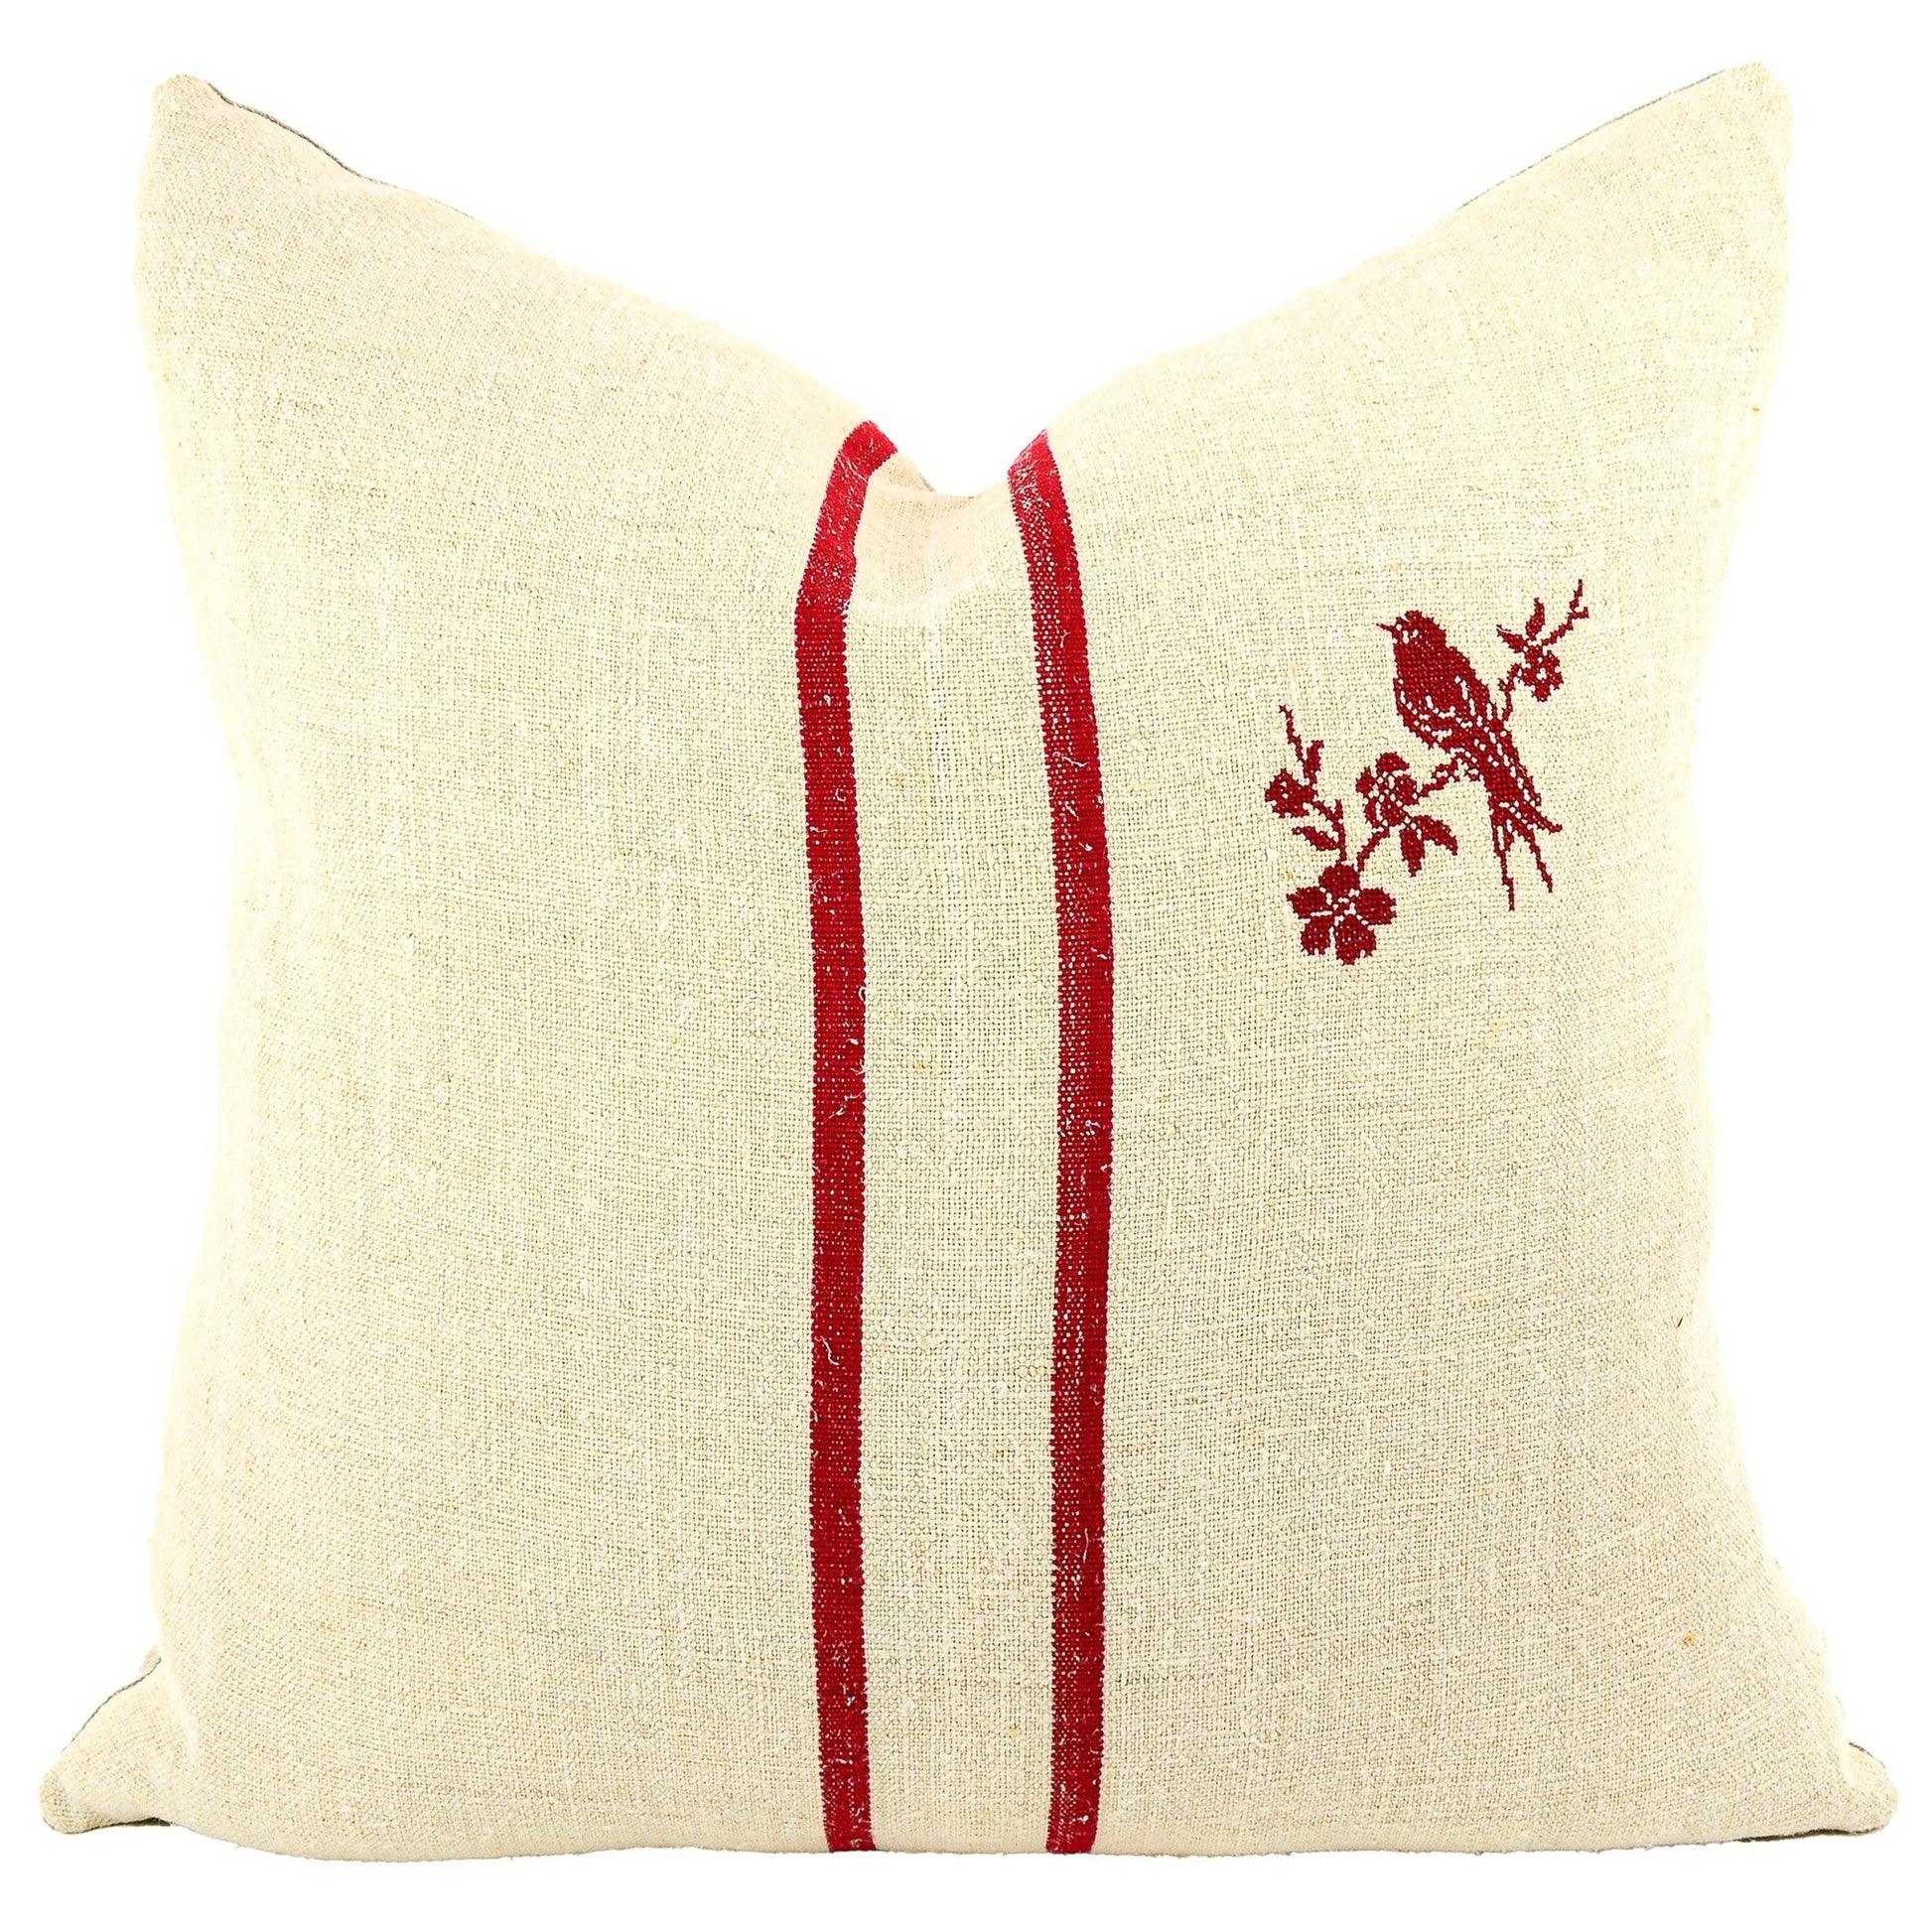 Front of pillow made from antique European grain sack natural tone linen with deep French red stripes that are perfectly complemented by a red cross-stitched bird, embroidered using an old French pattern